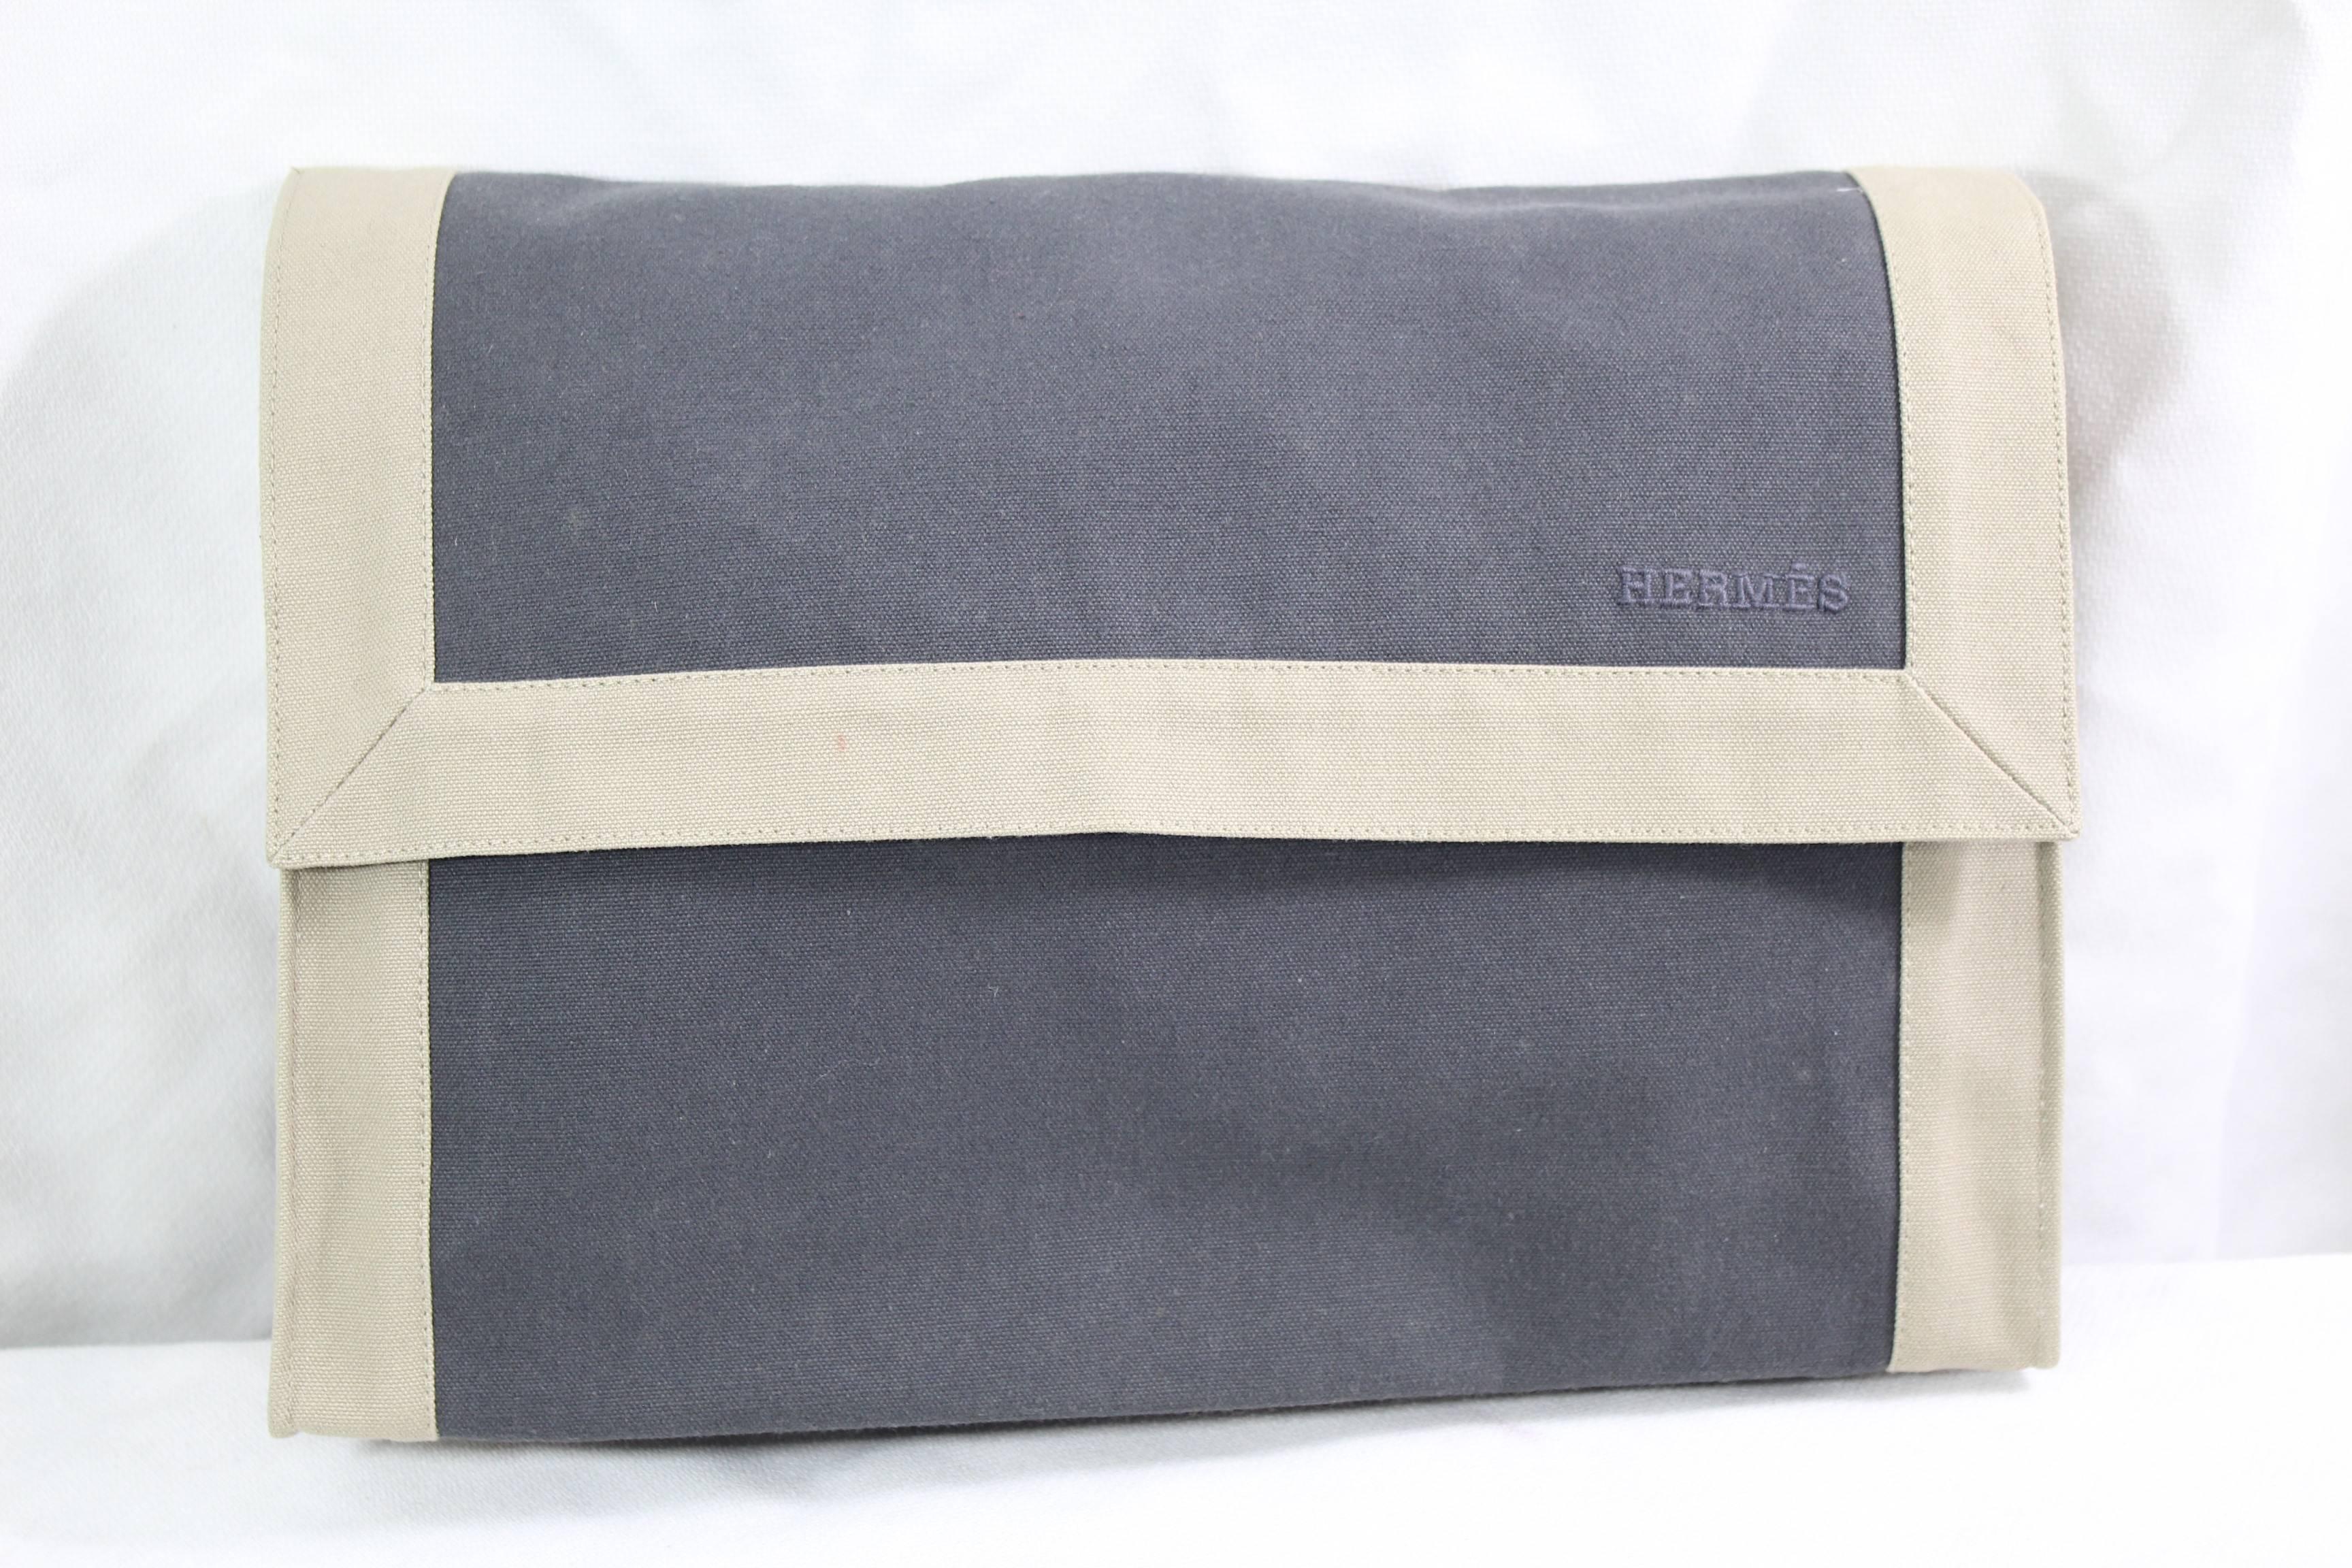 Nice Hermes canvas clutch/. toiletry Pouch with box.

really good condition, 

Size 12.5*8.5 inches